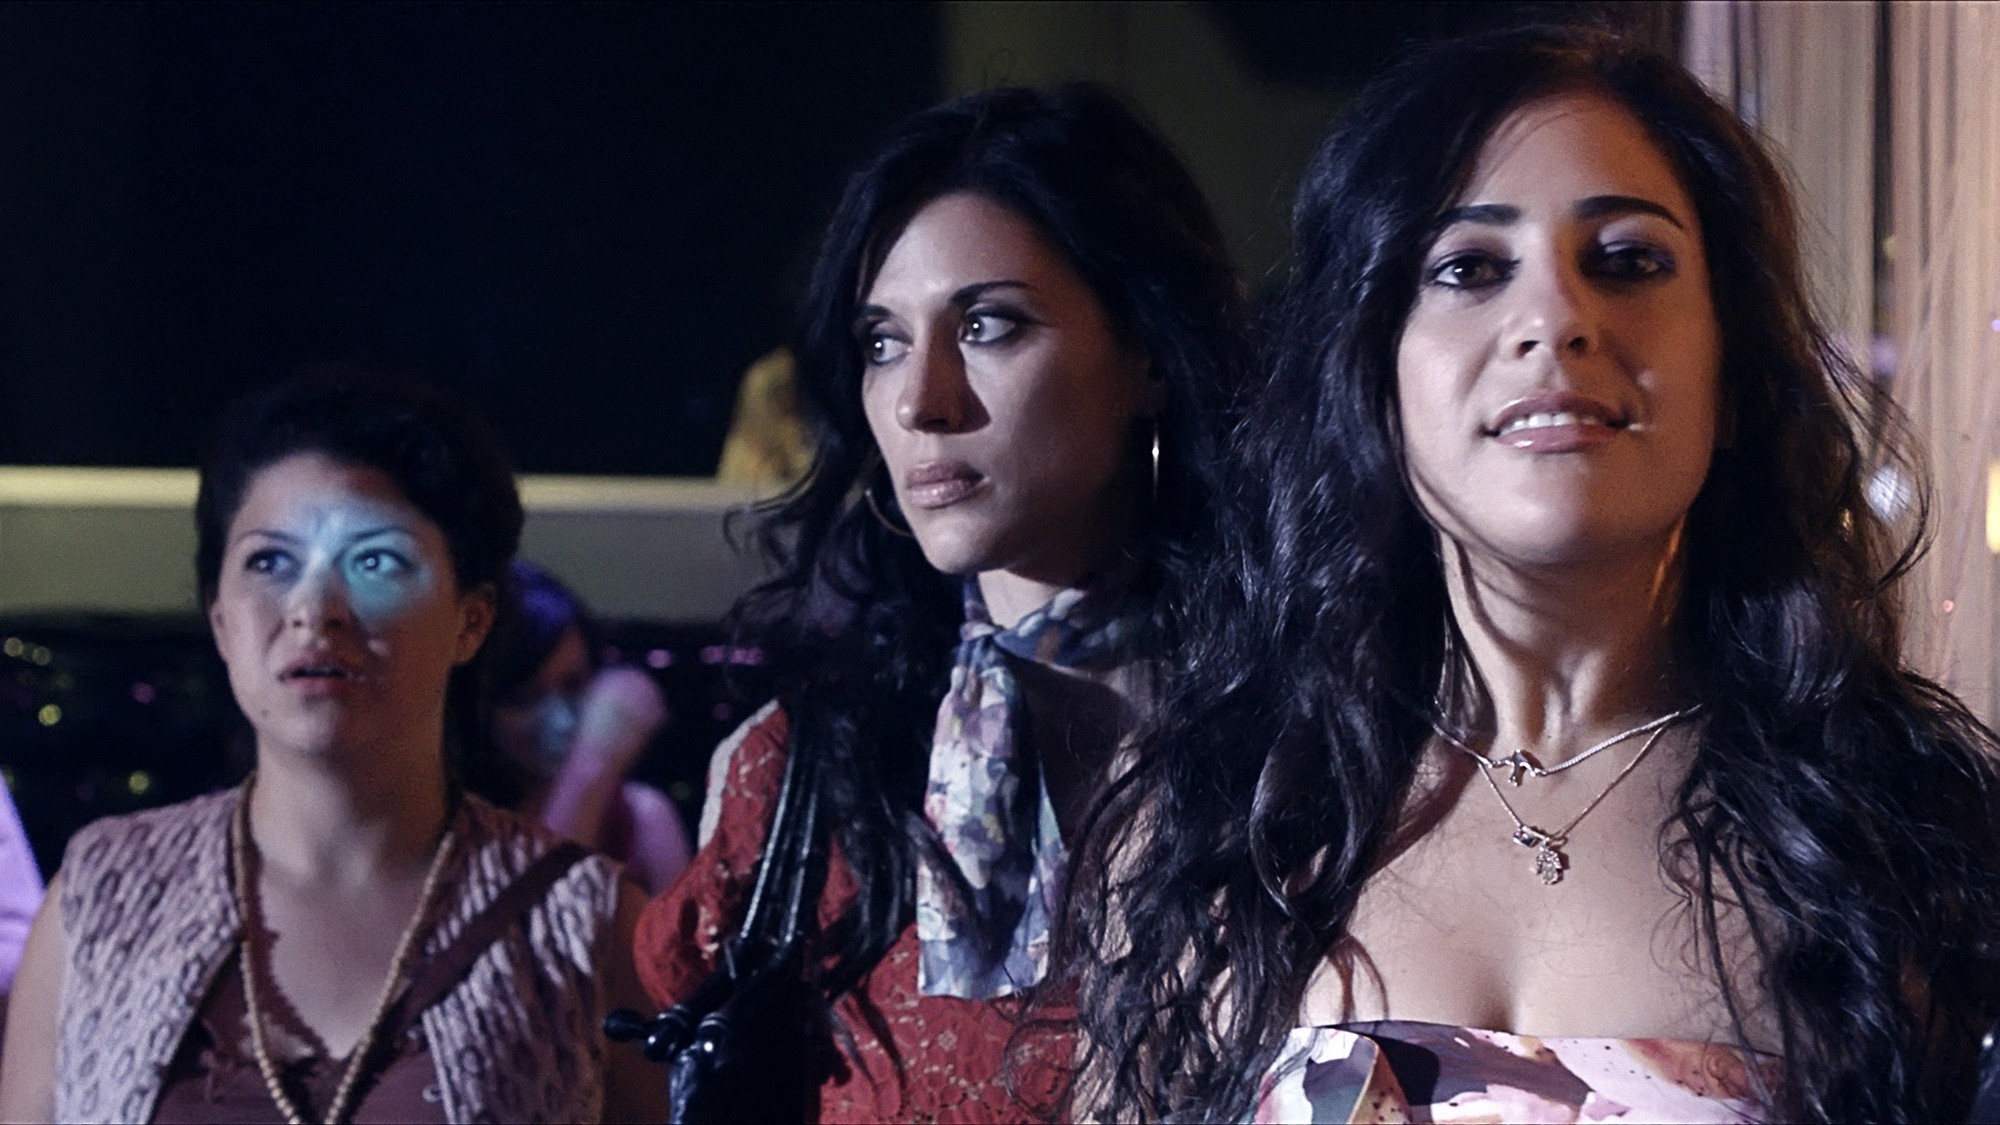 Ritu Singh Pande stars as Anu and Nadine Malouf stars as Yasmine in Cohen Media Group's May in the Summer (2014)